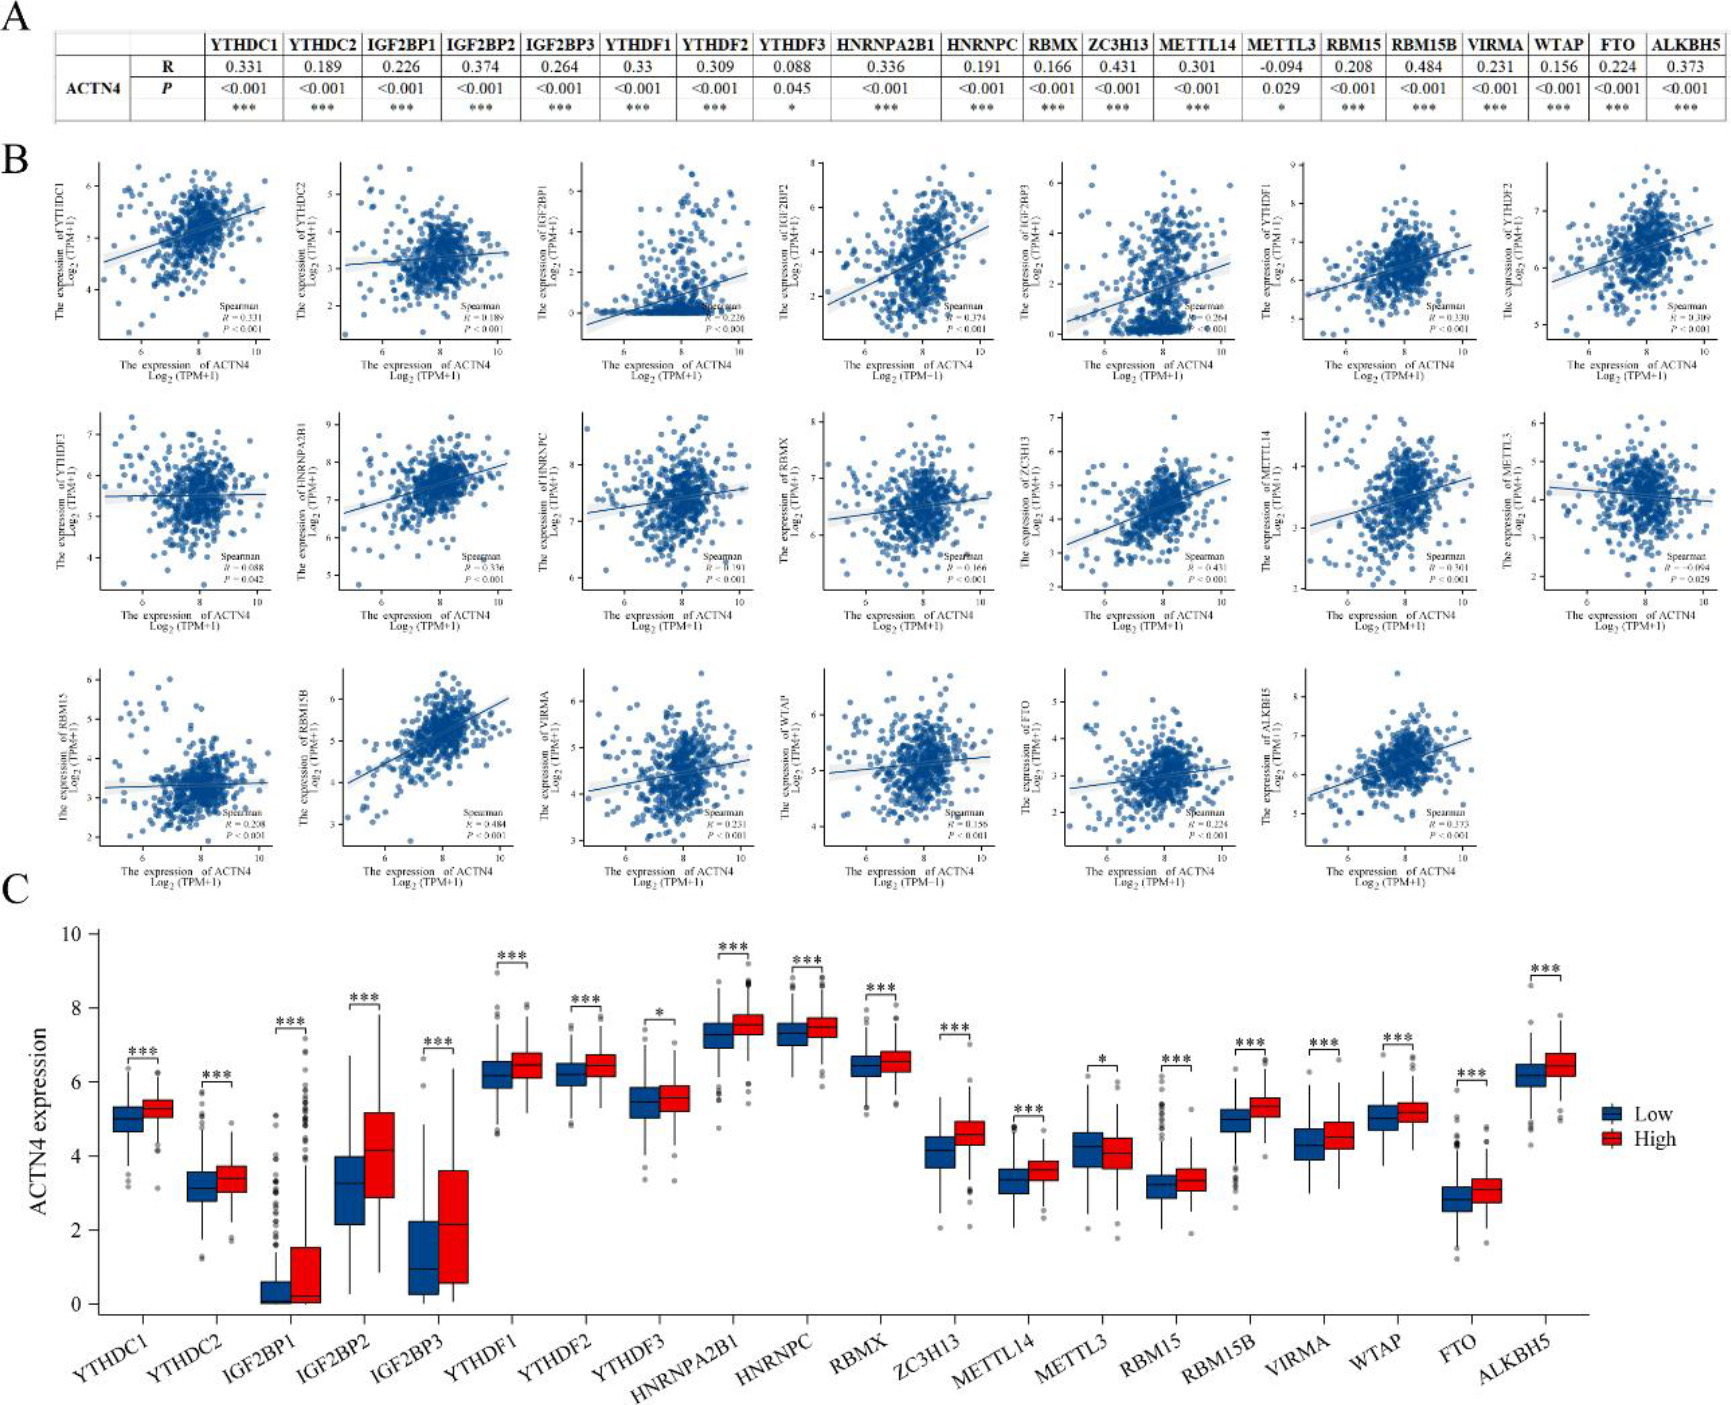 Correlations of ACTN4 expression with m6A related genes in lung adenocarcinoma (LUAD). (A) TCGA-LUAD analyzed the correlation between the expression level of ACTN4 and m6A-related genes. (B) Draw a scatter plot to show the correlation between ACTN4 and m6A related genes. (C) The differential expression of m6A related genes in the high and low ACTN4 expression groups in LUAD. *P < 0.05, and ***P < 0.001.